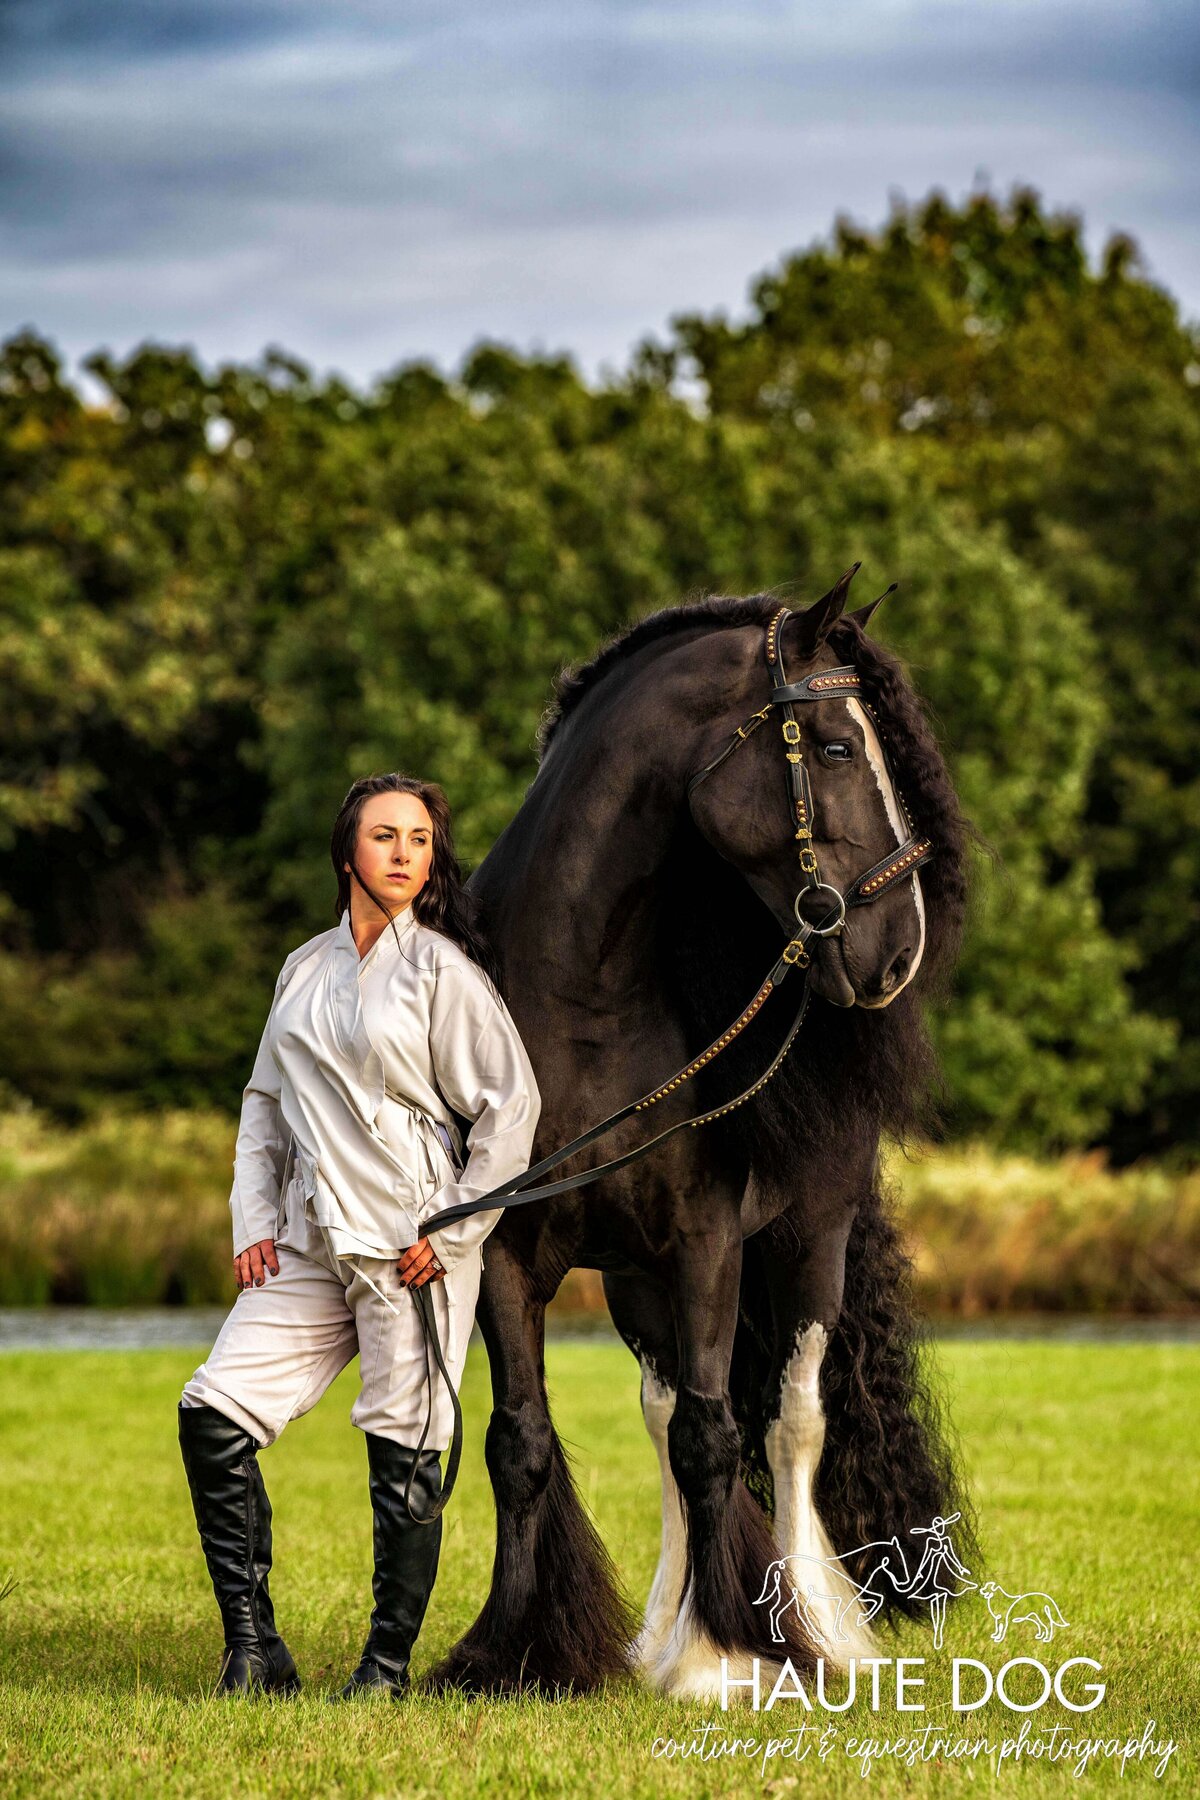 Female equestrian poses with black Gypsy Vanner wearing an ornate bridle, both looking to the side.